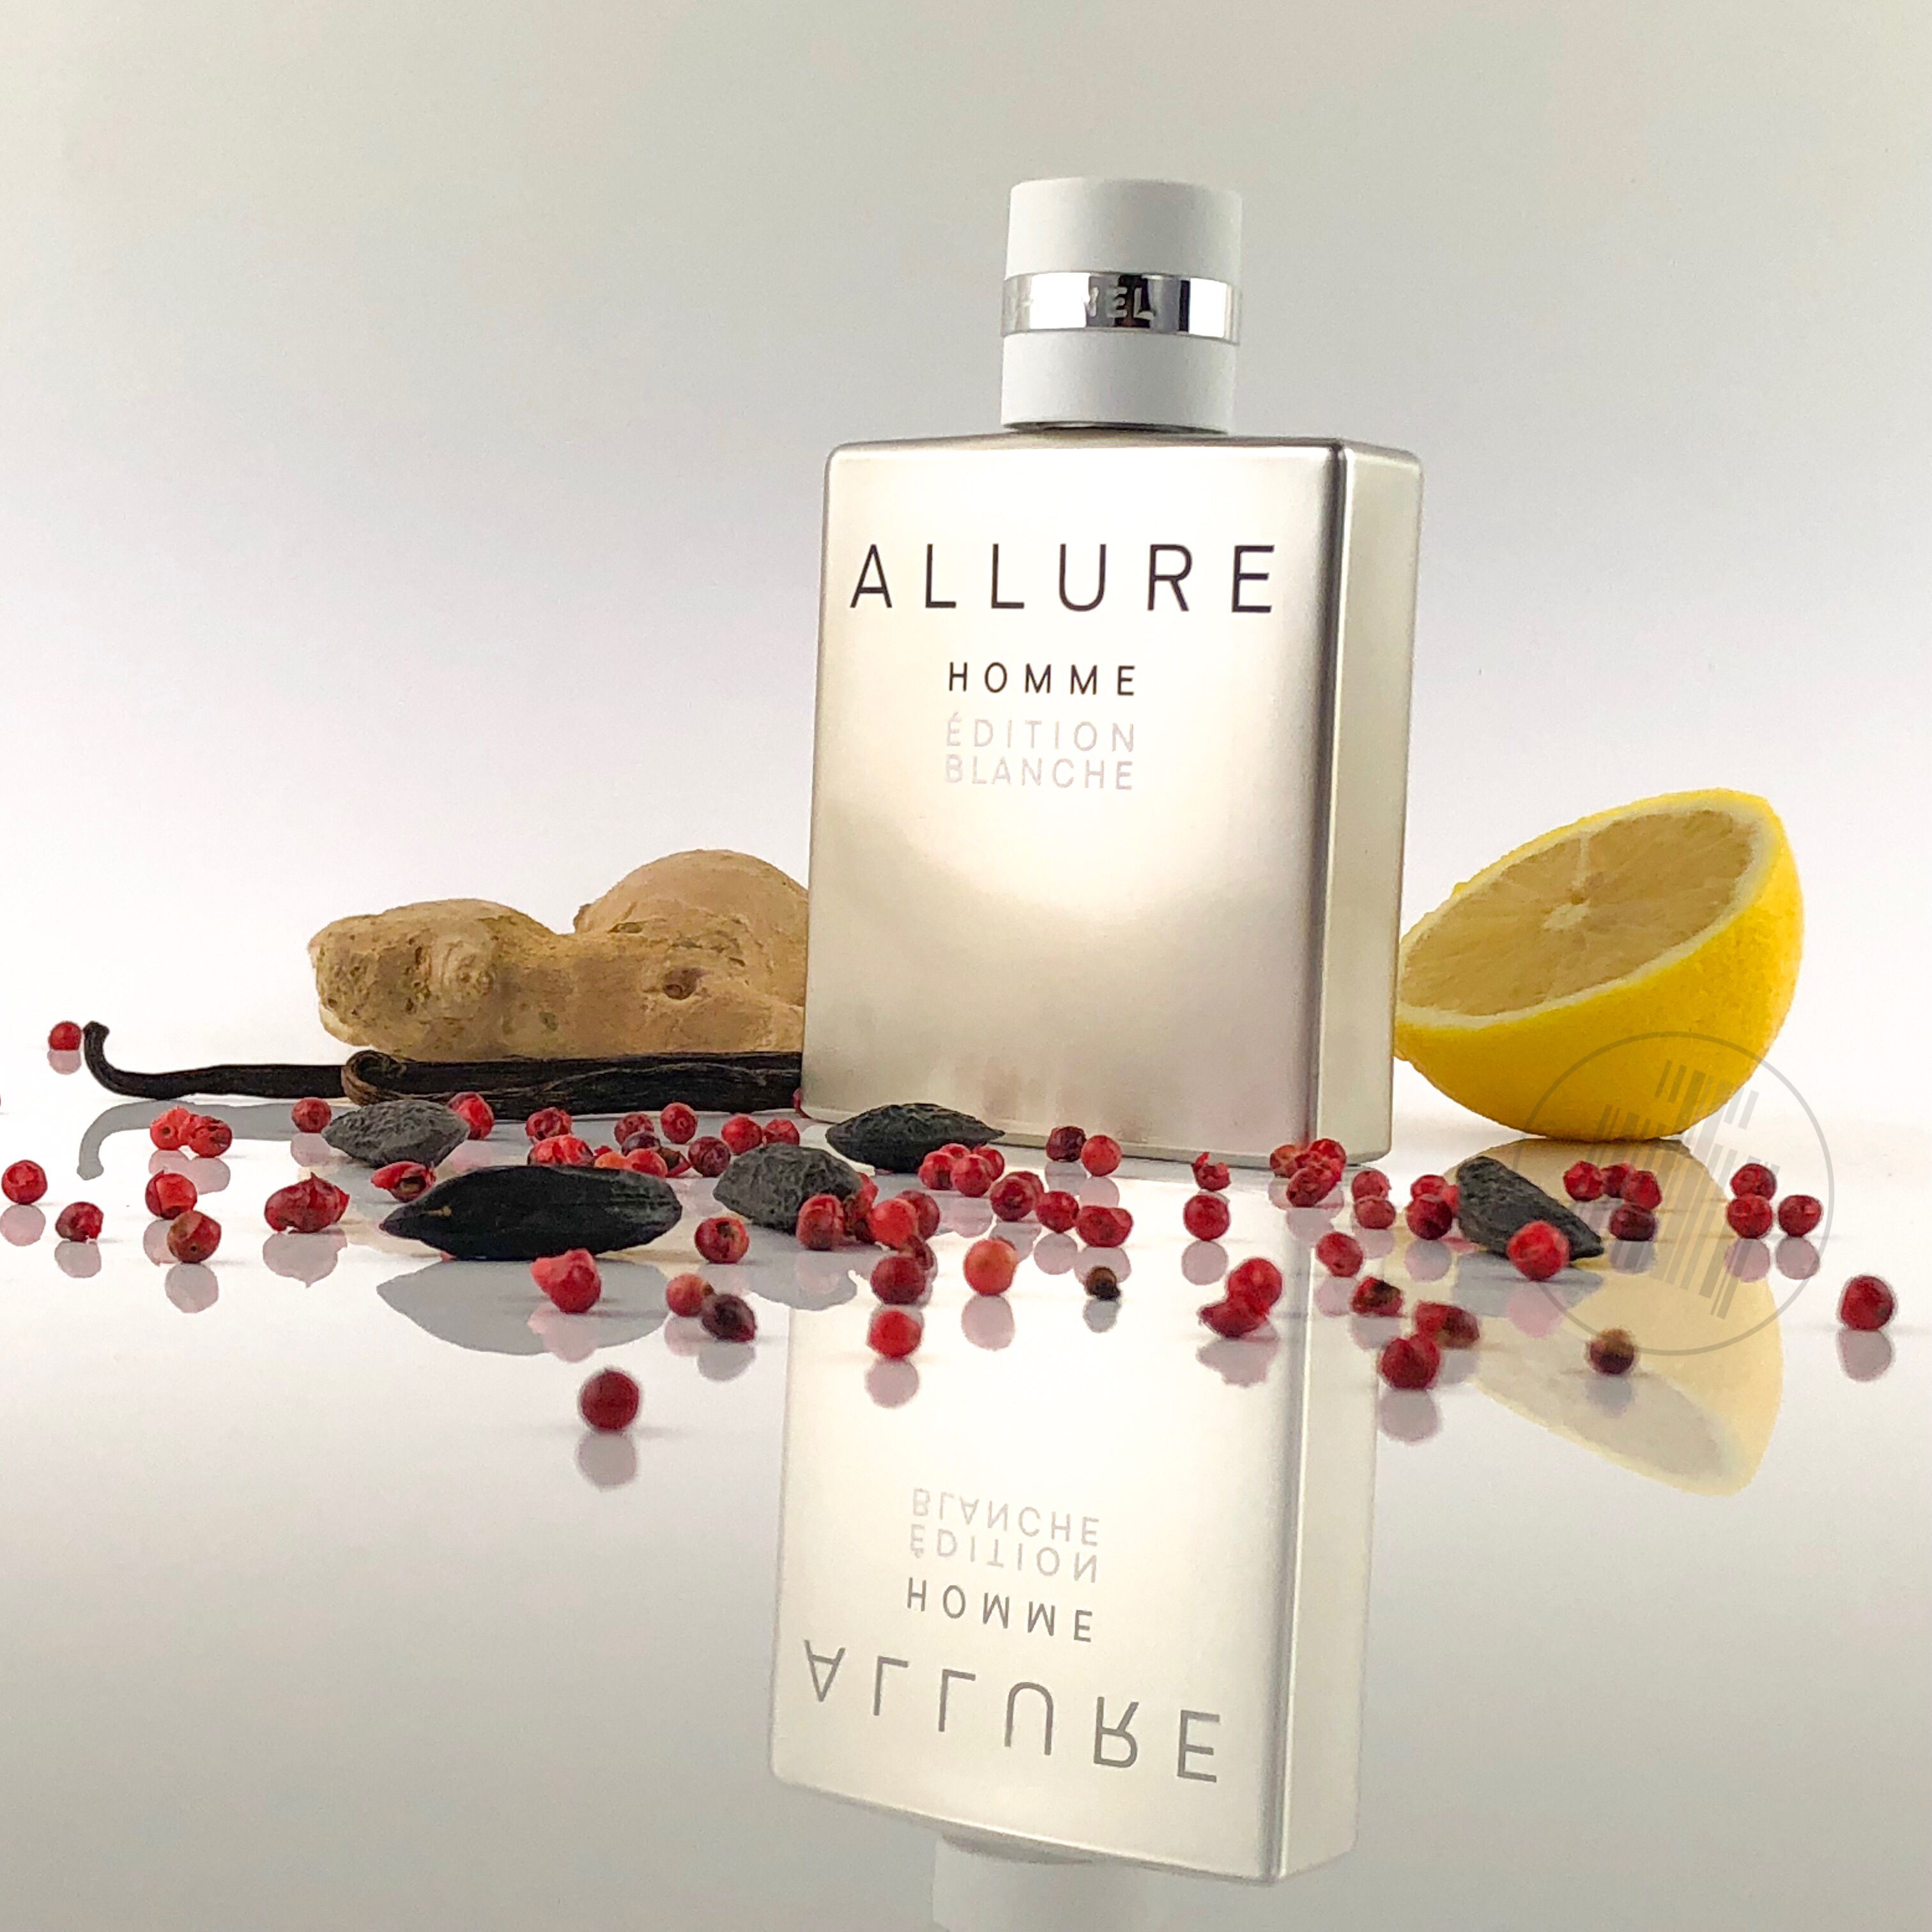 Allure Homme Edition Blanche EDP (M)